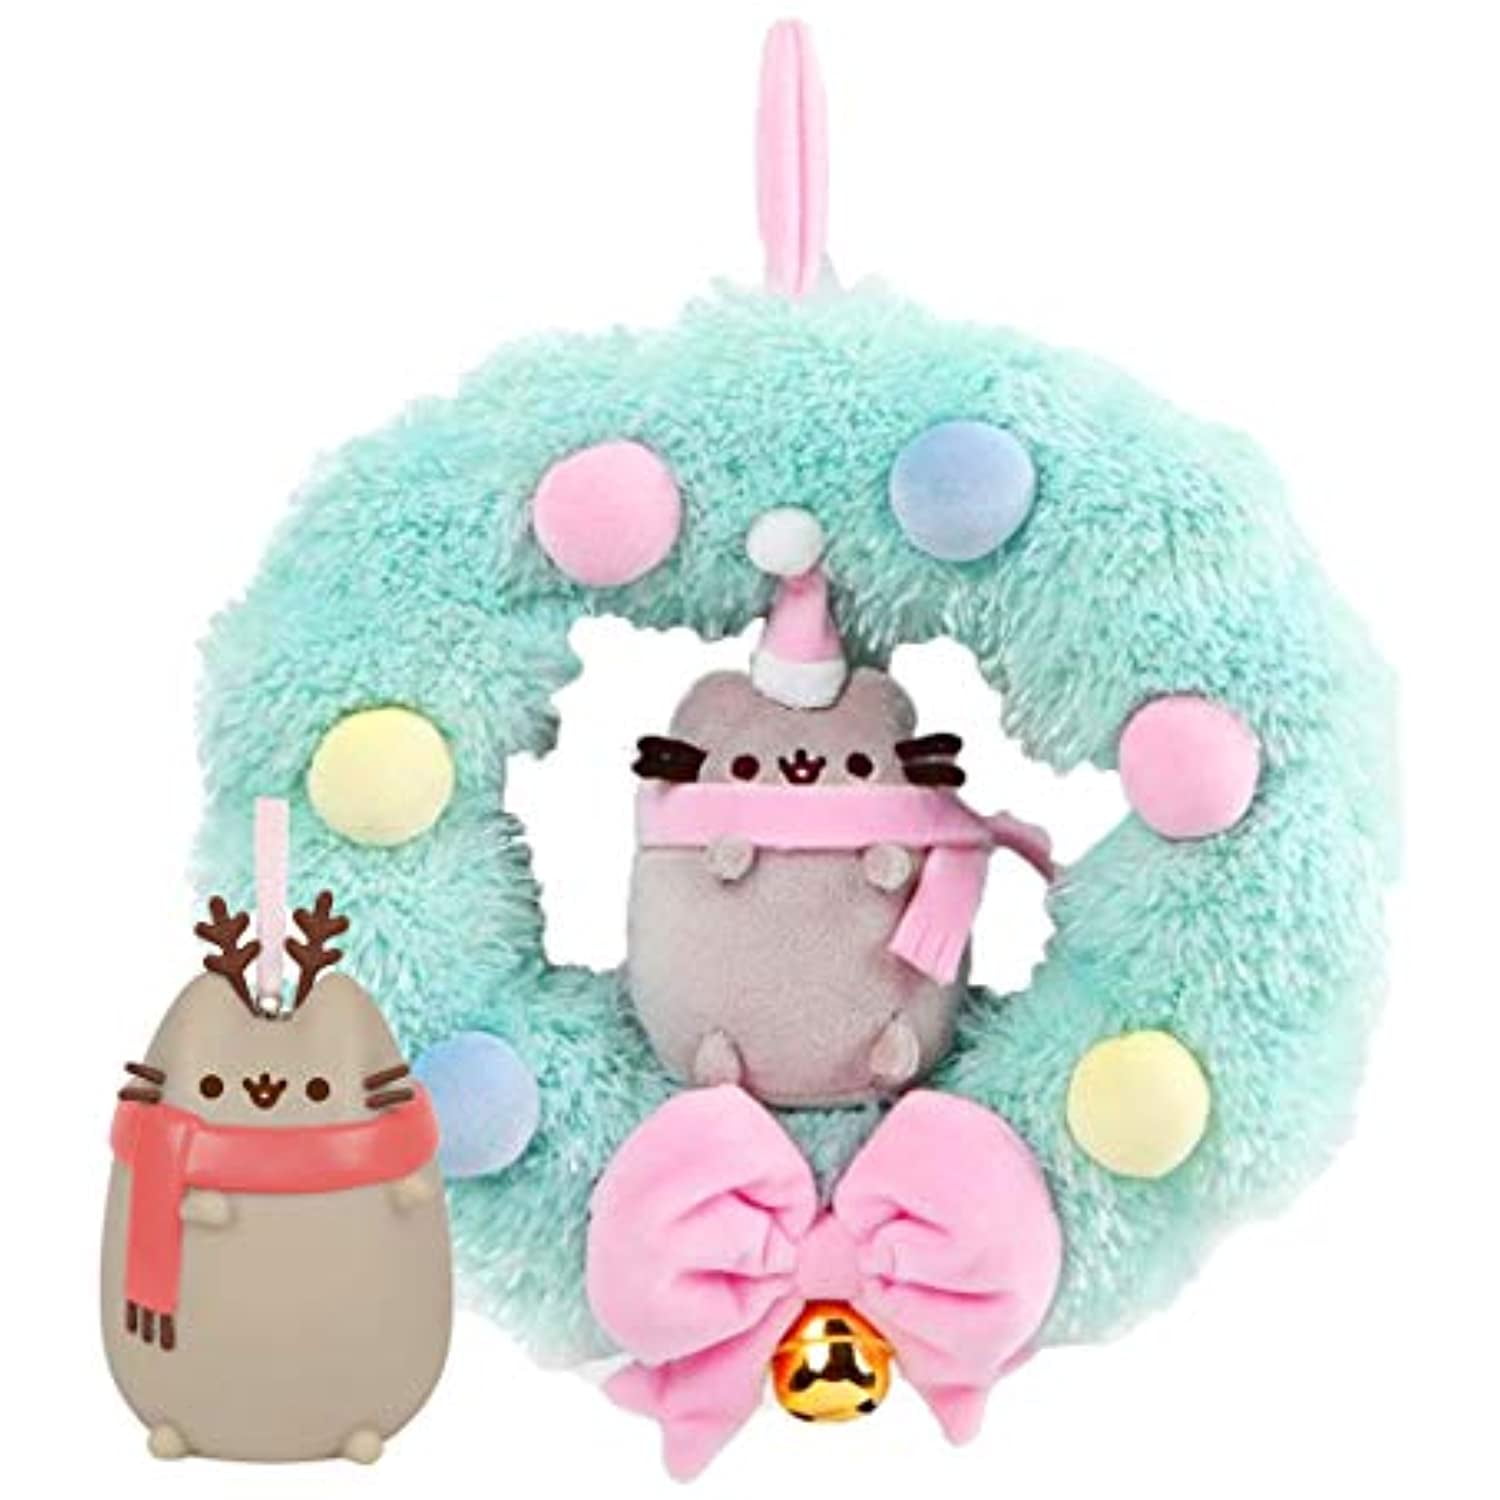 Pusheen Holding Candle Series 5 Holiday Cheer Plush  Christmas Ornament 